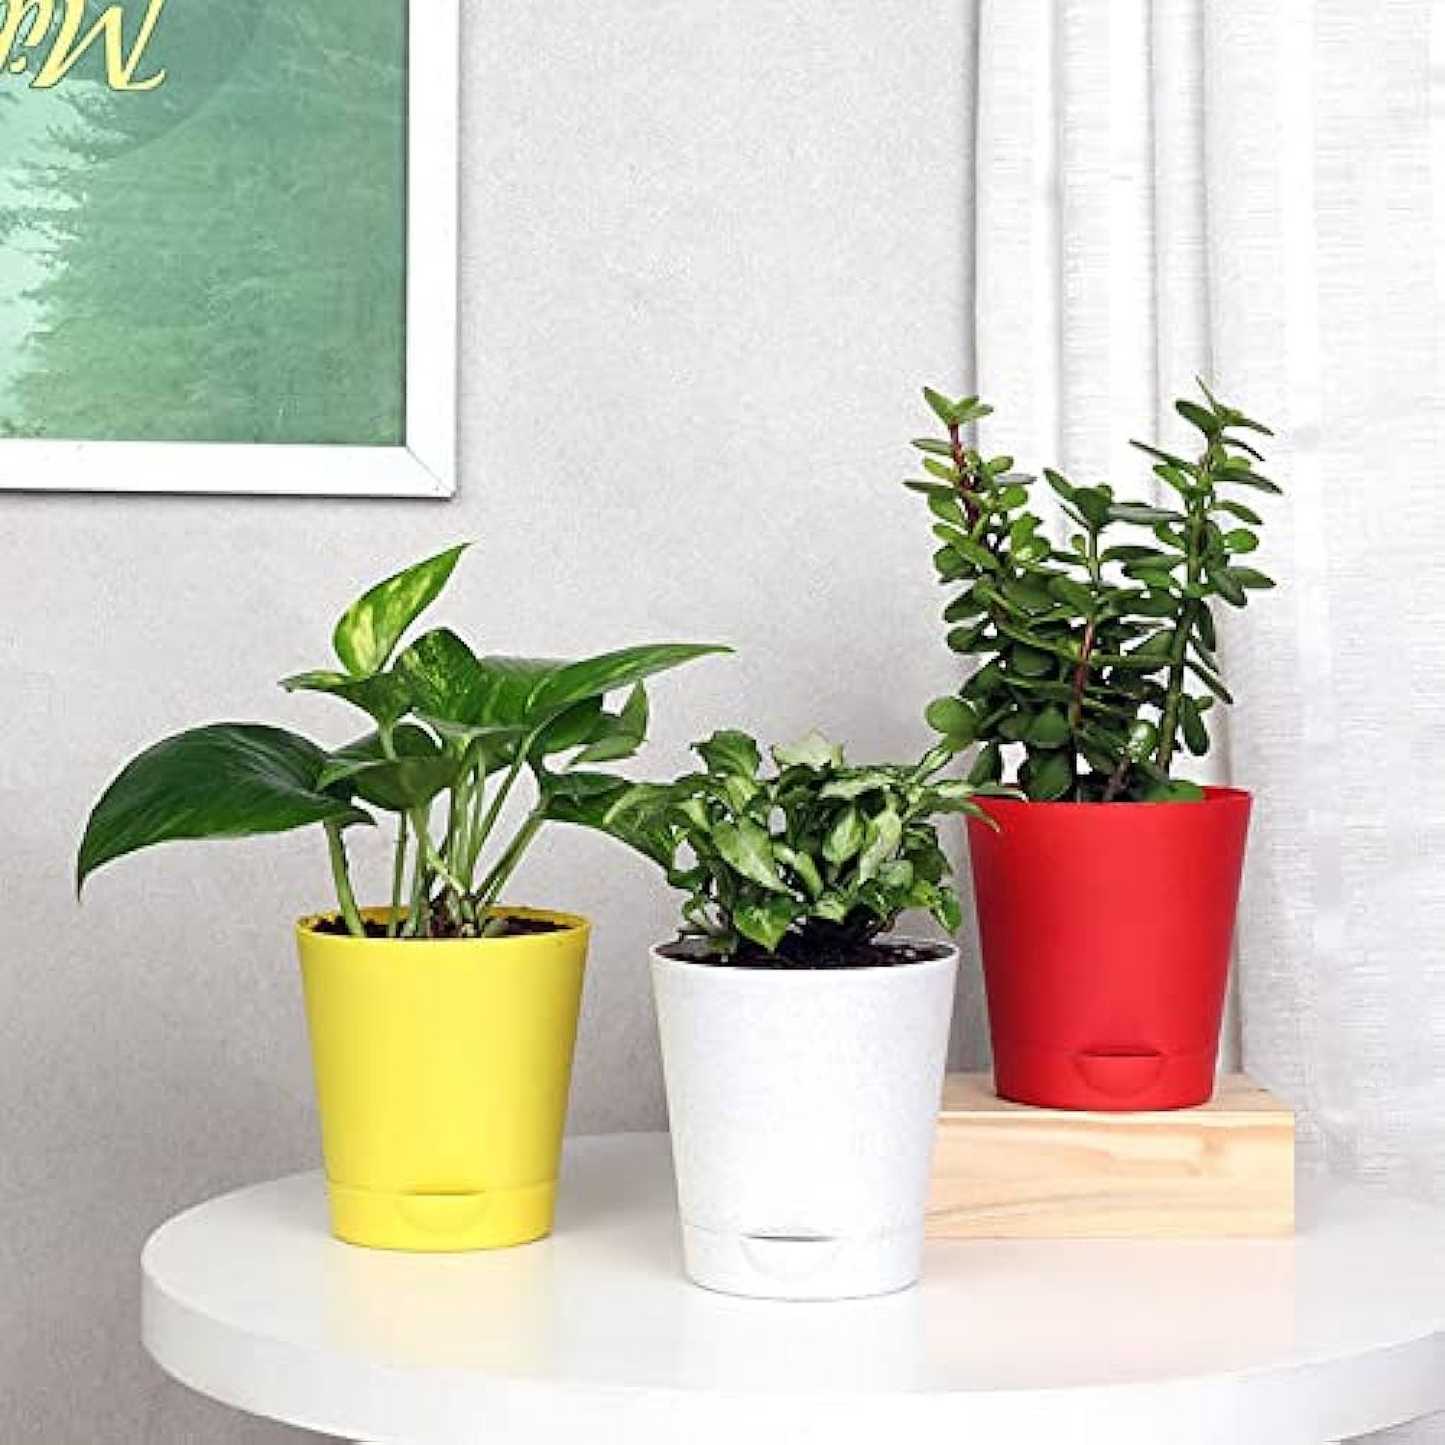 Pack of 3 Good Luck Jade Plants